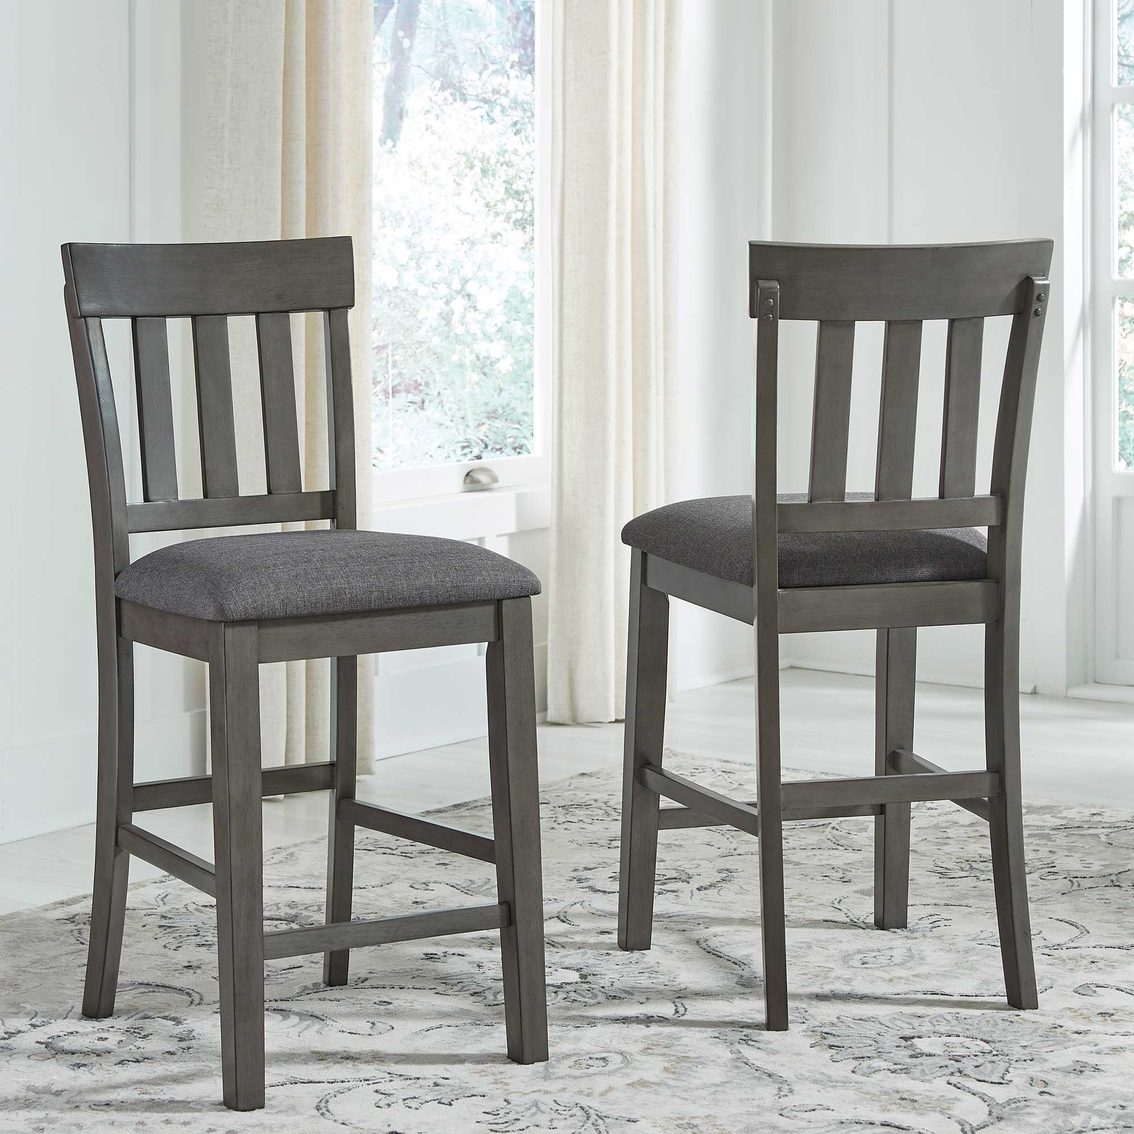 Signature Design by Ashley Hallanden Dining Counter Stool 2 pk. - Image 2 of 2